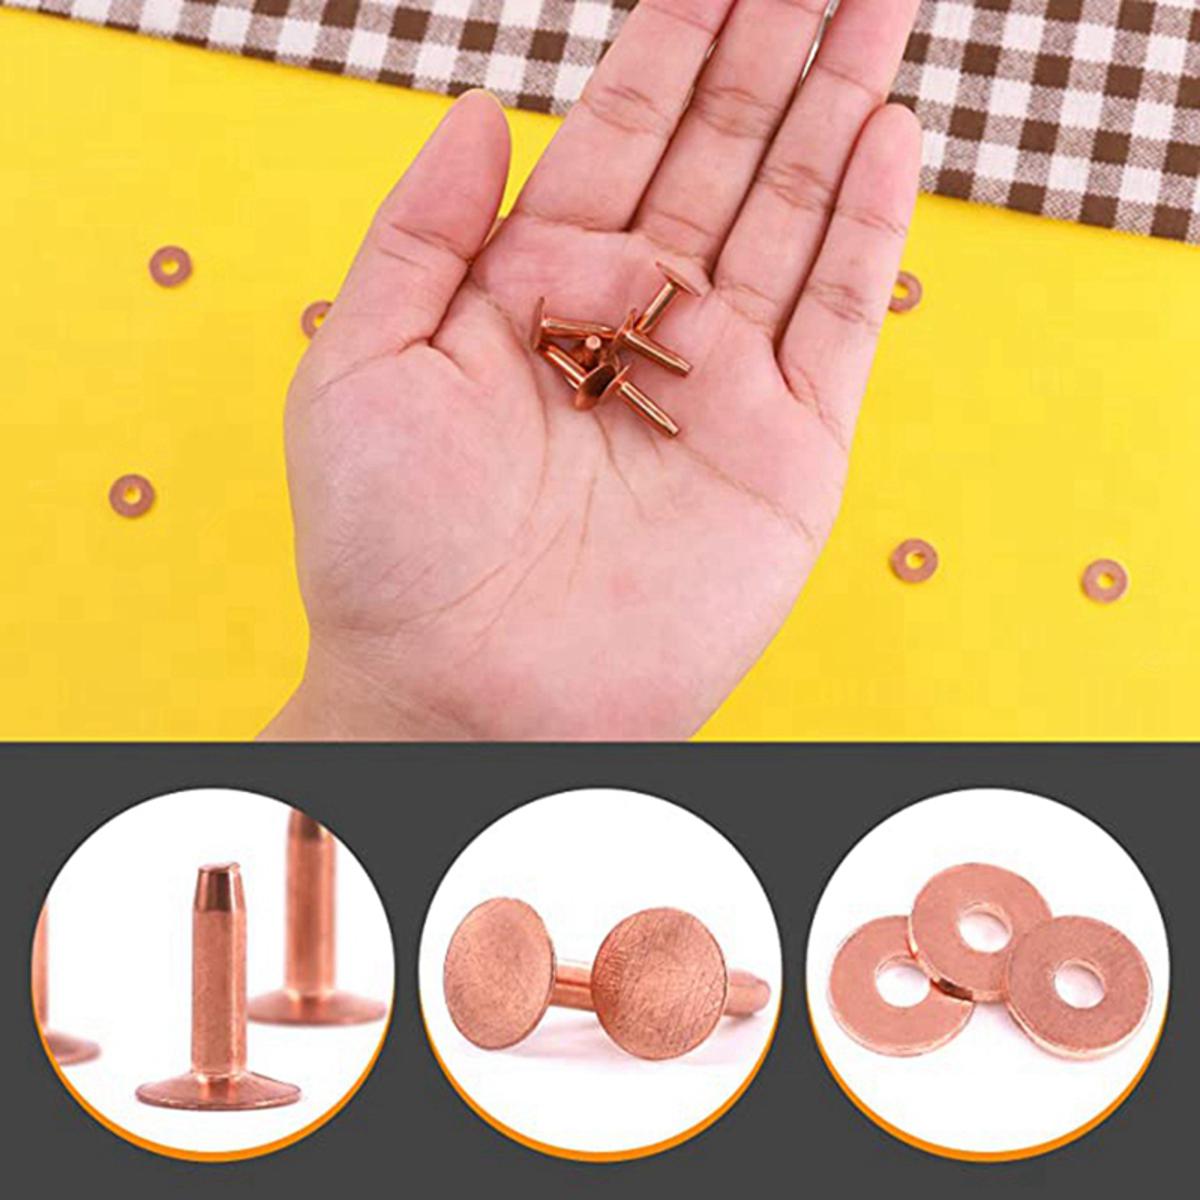 Toogoo 100 Sets Copper Rivets and Burrs Washers Leather Copper Rivet Fastener for Wallets Collars Leather DIY Craft Supplies, Size: 19, Other